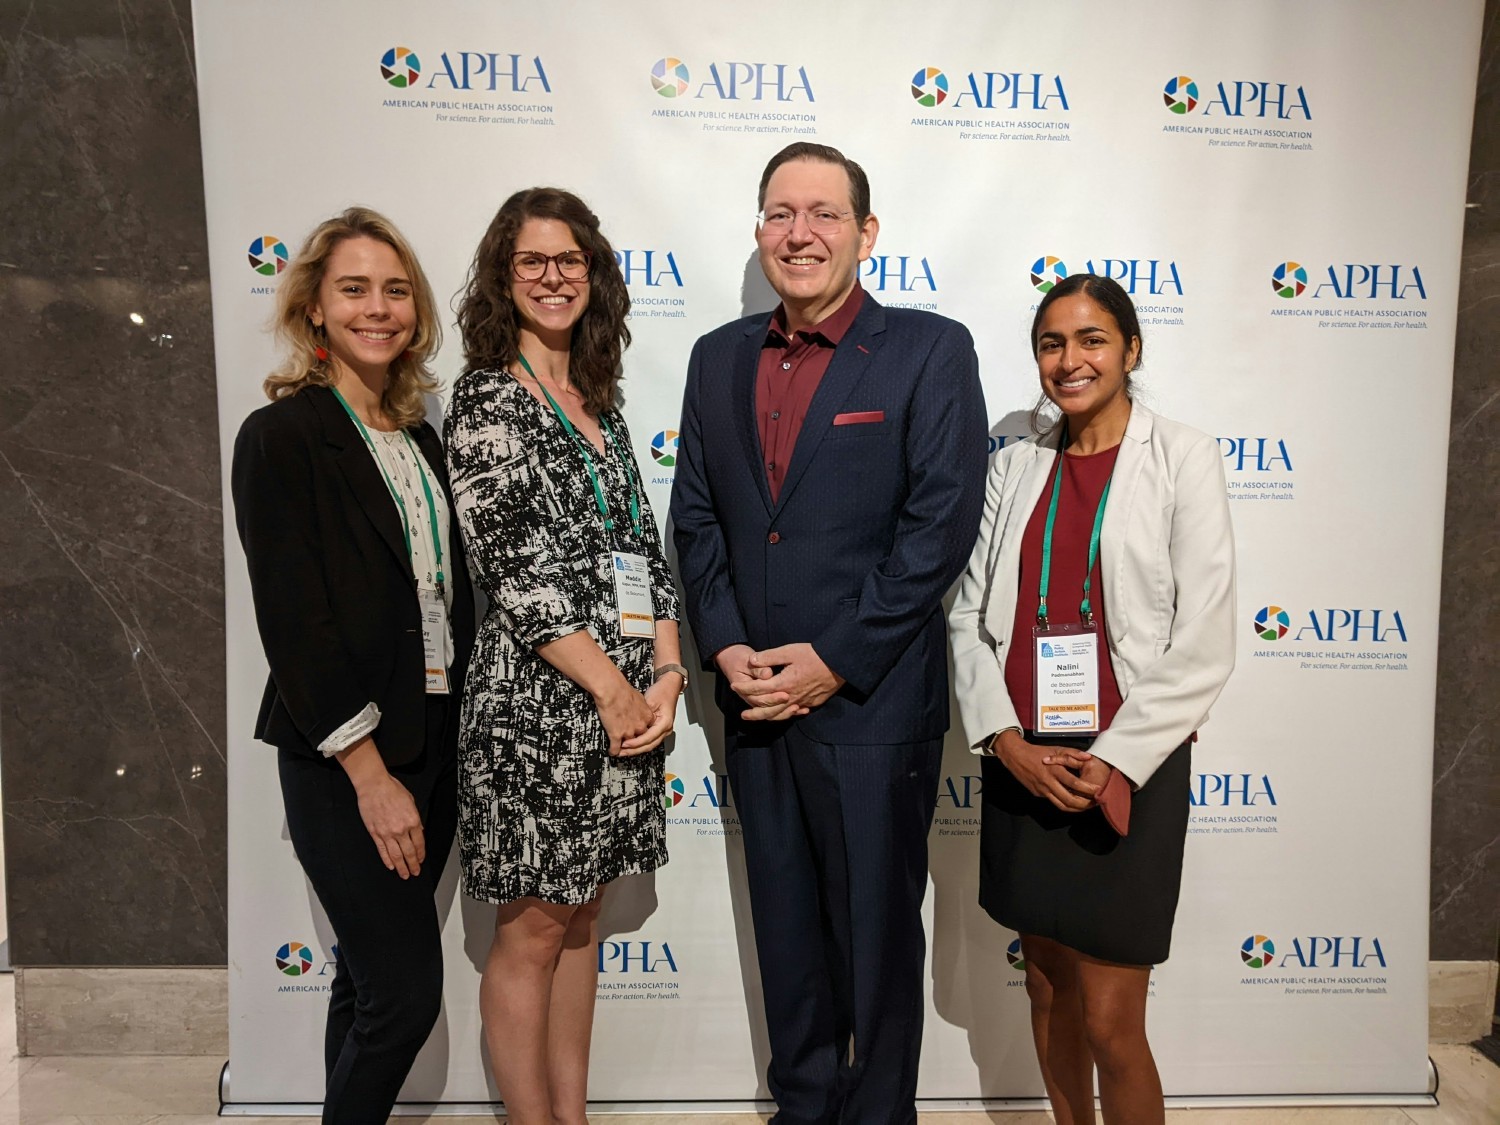 Staff attending the APHA conference